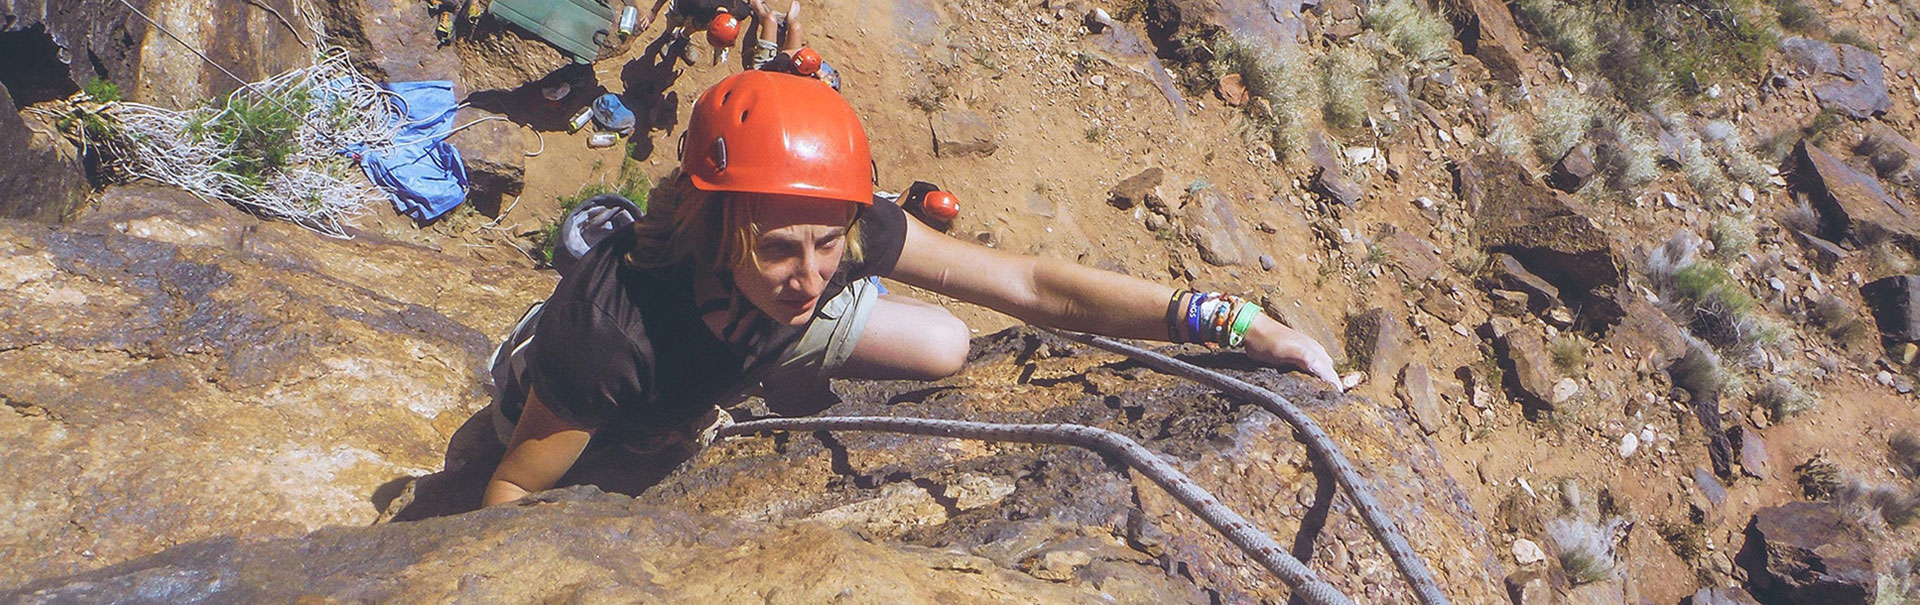 Adventure Therapy Activities like Rock Climbing help Struggling Teens and Young Adults